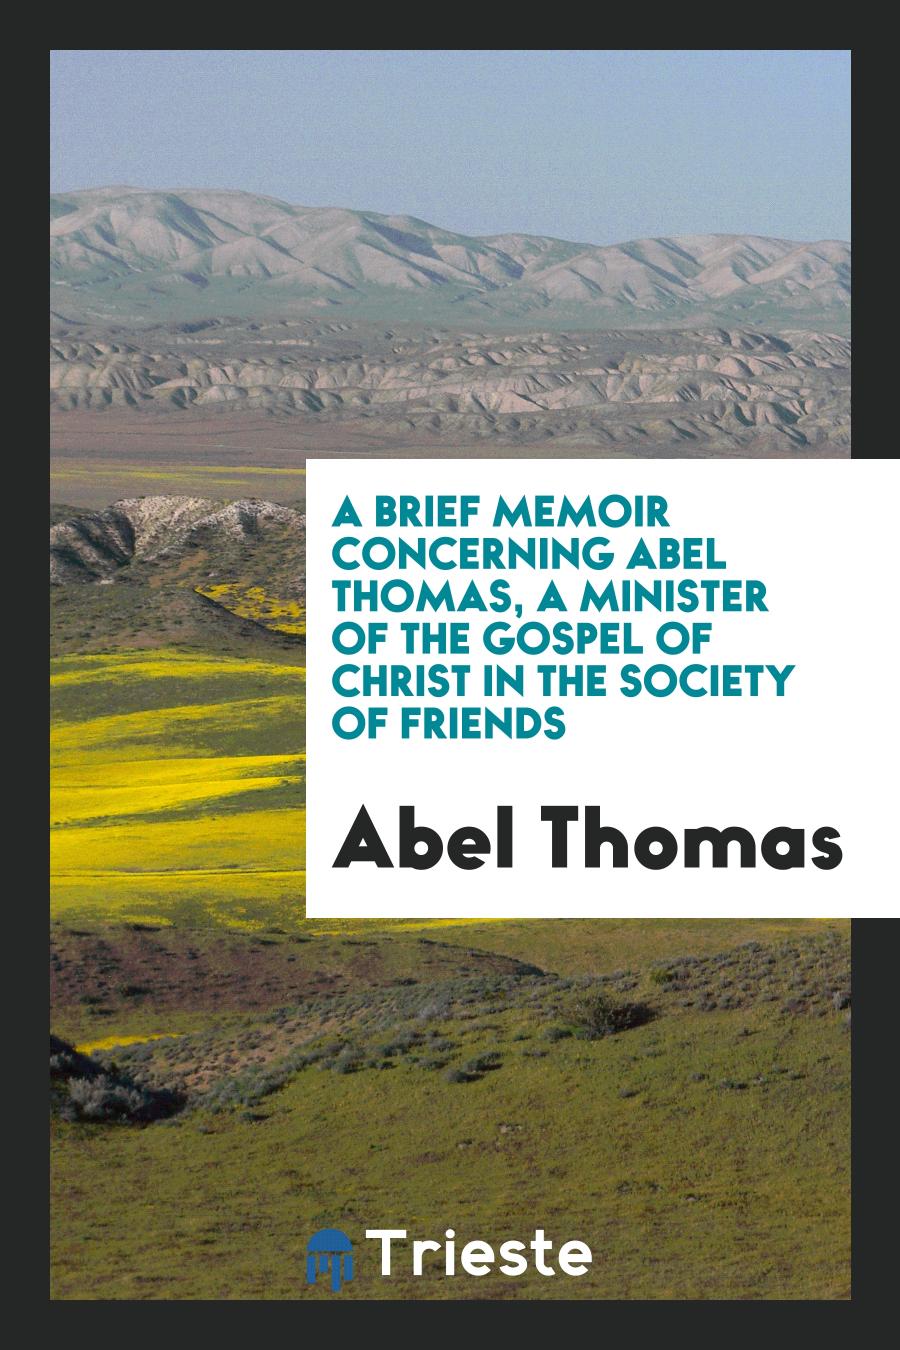 A Brief Memoir Concerning Abel Thomas, a Minister of the Gospel of Christ in the Society of Friends